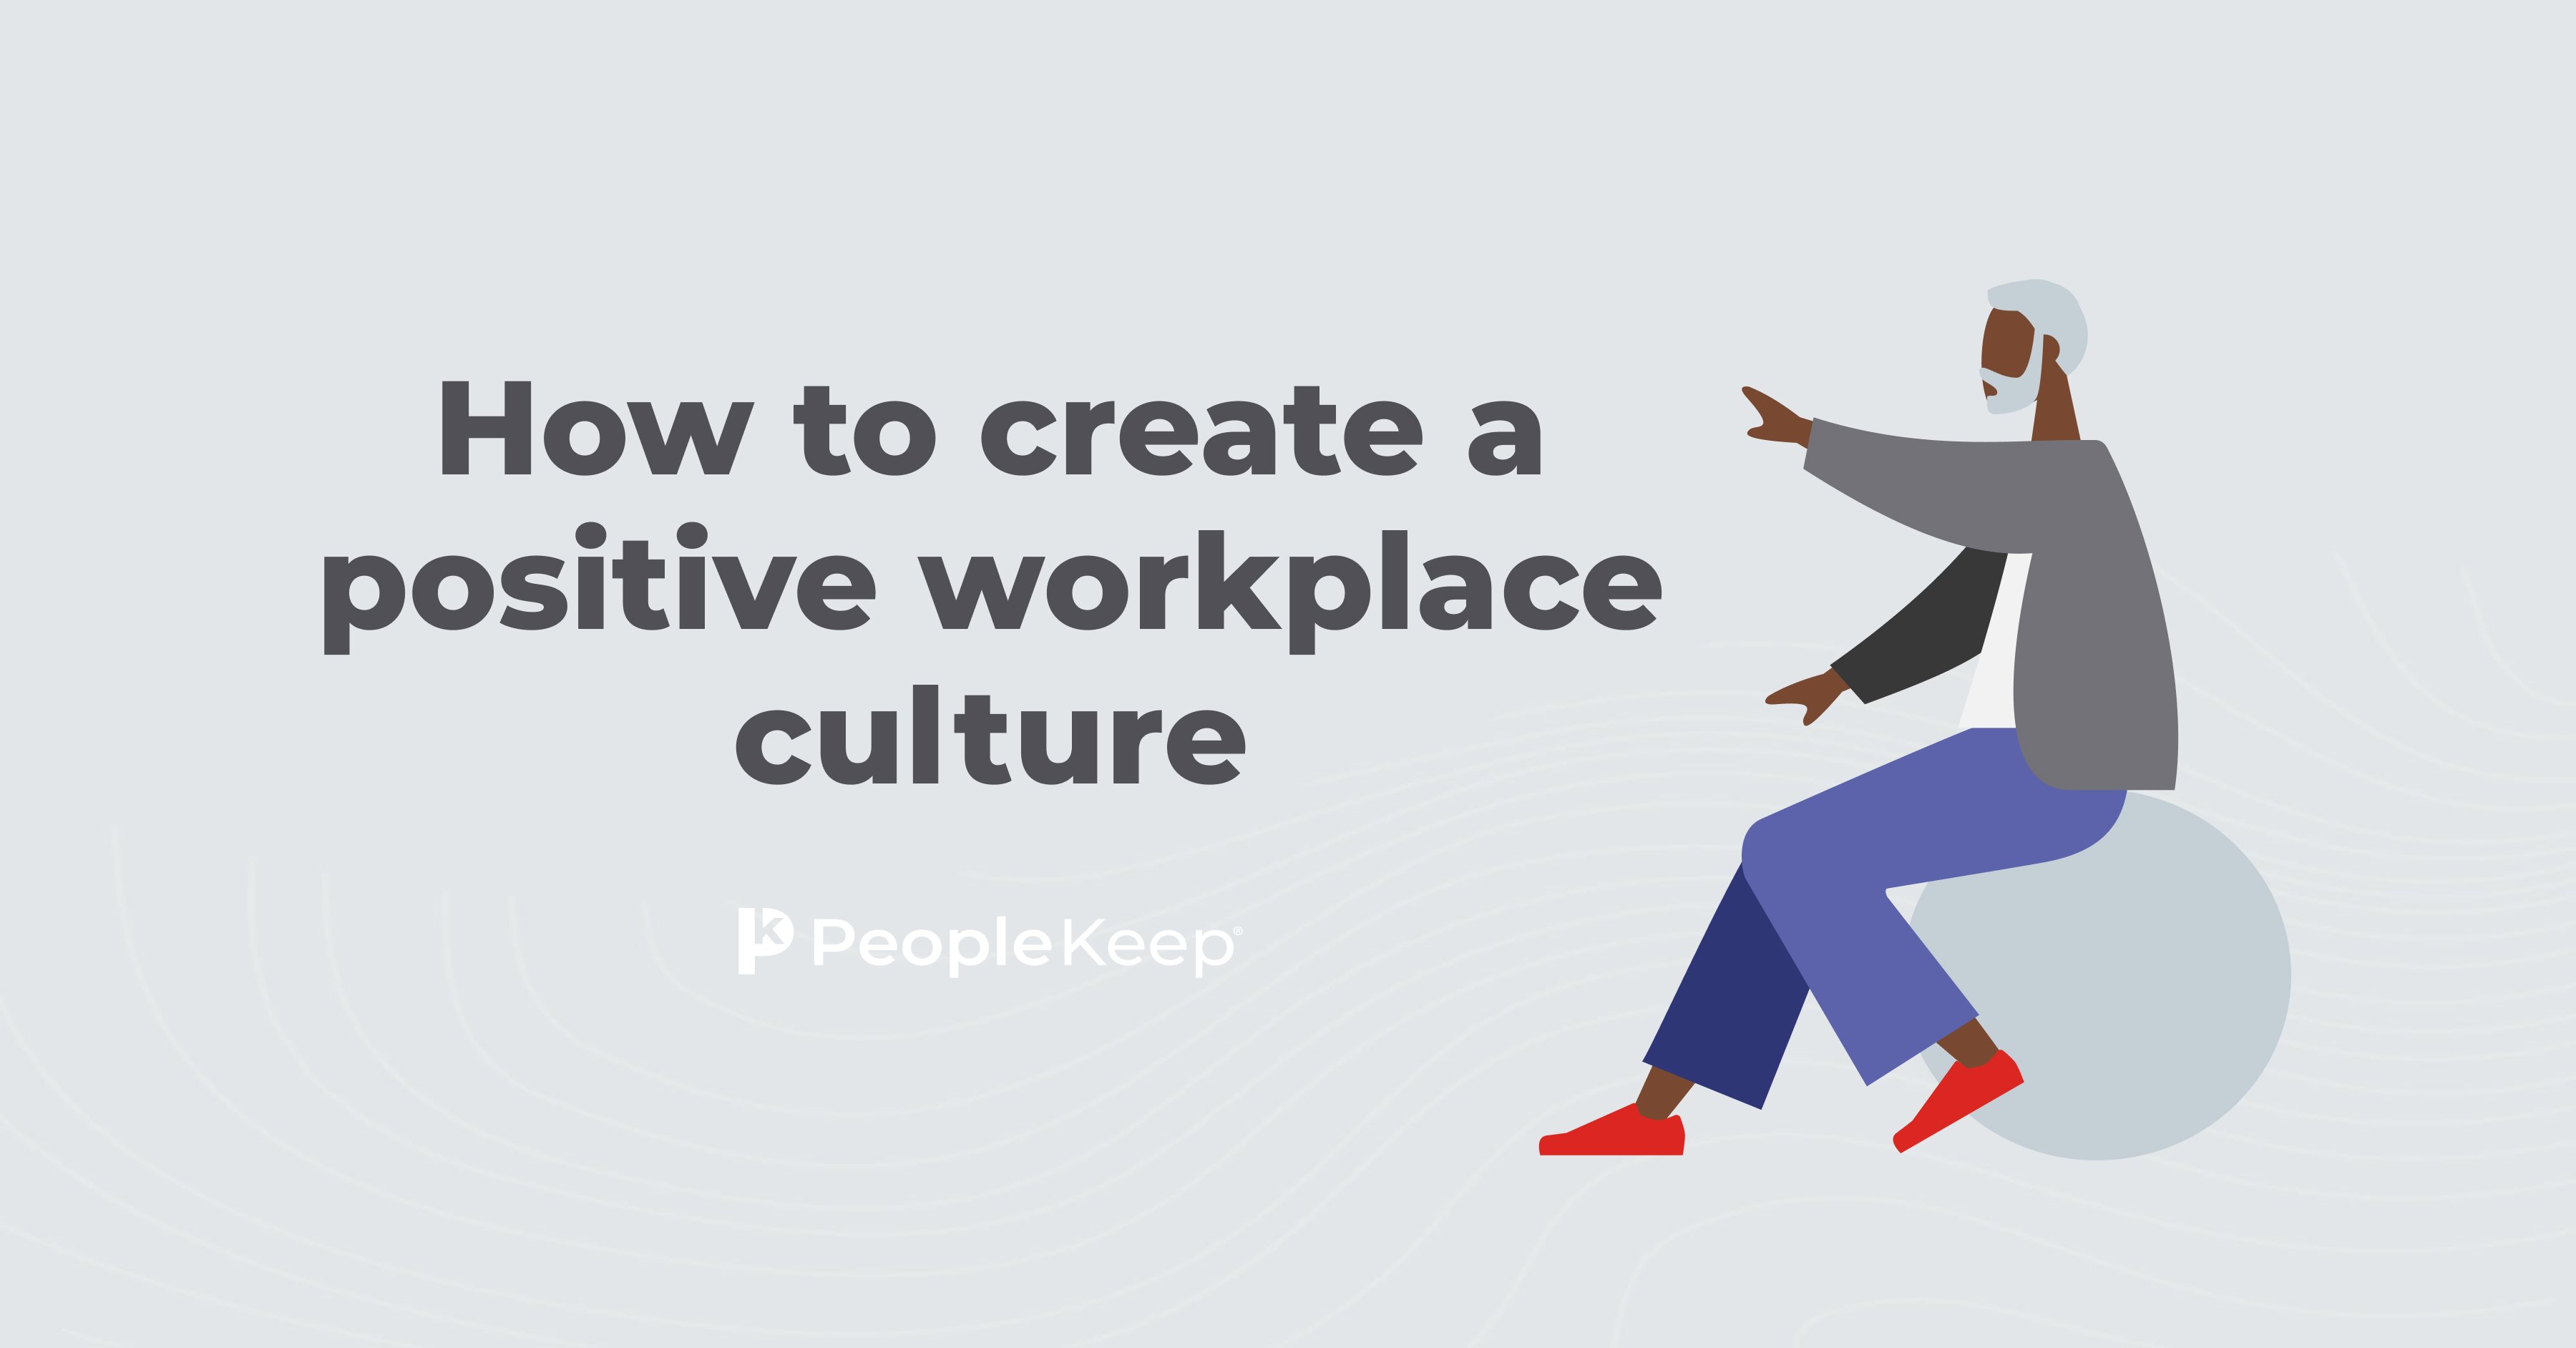 How to create a positive workplace culture